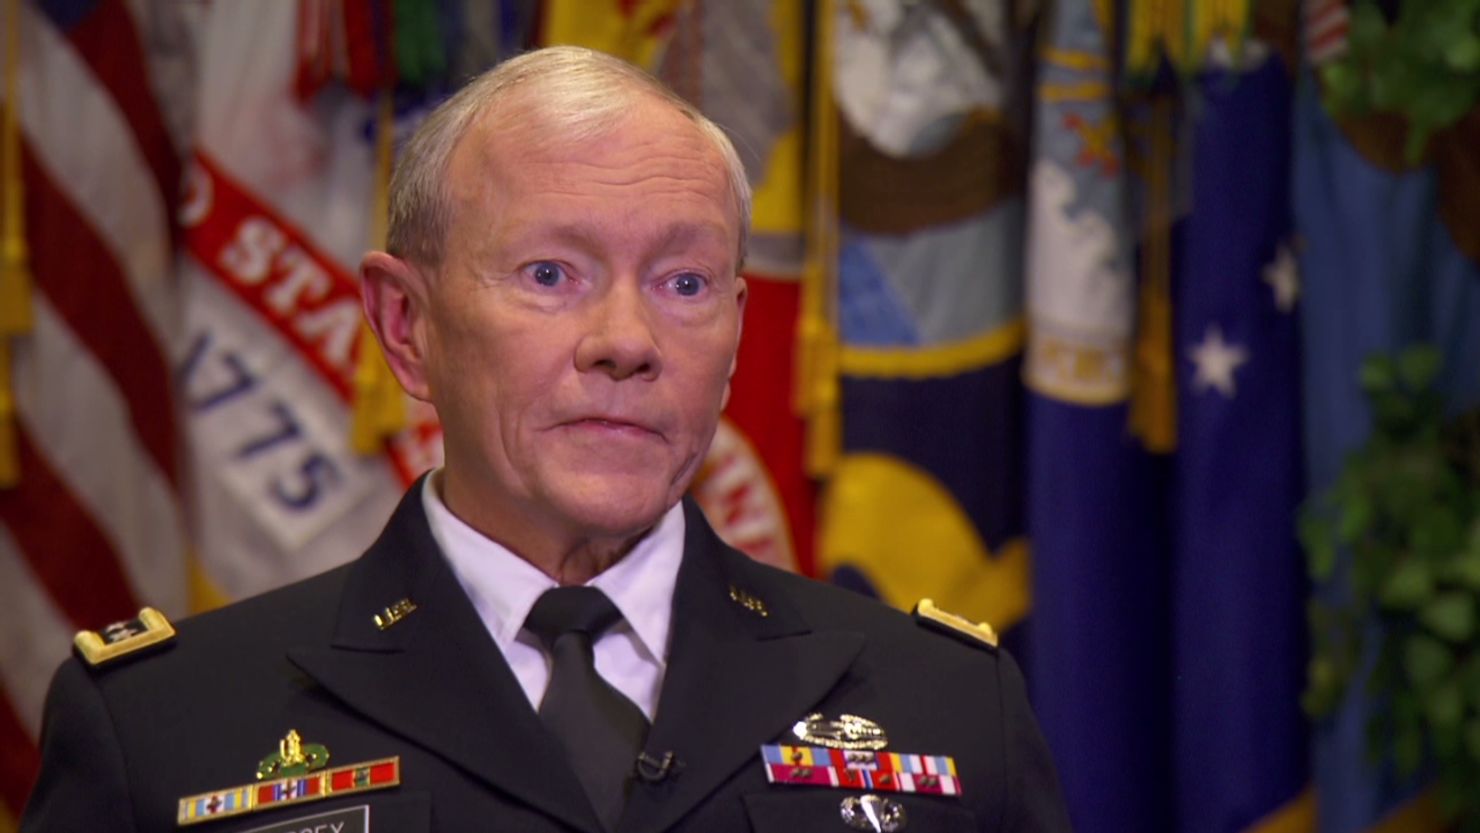 U.S. Army Gen. Martin Dempsey said the United States faces "a 10-year issue" in Syria.